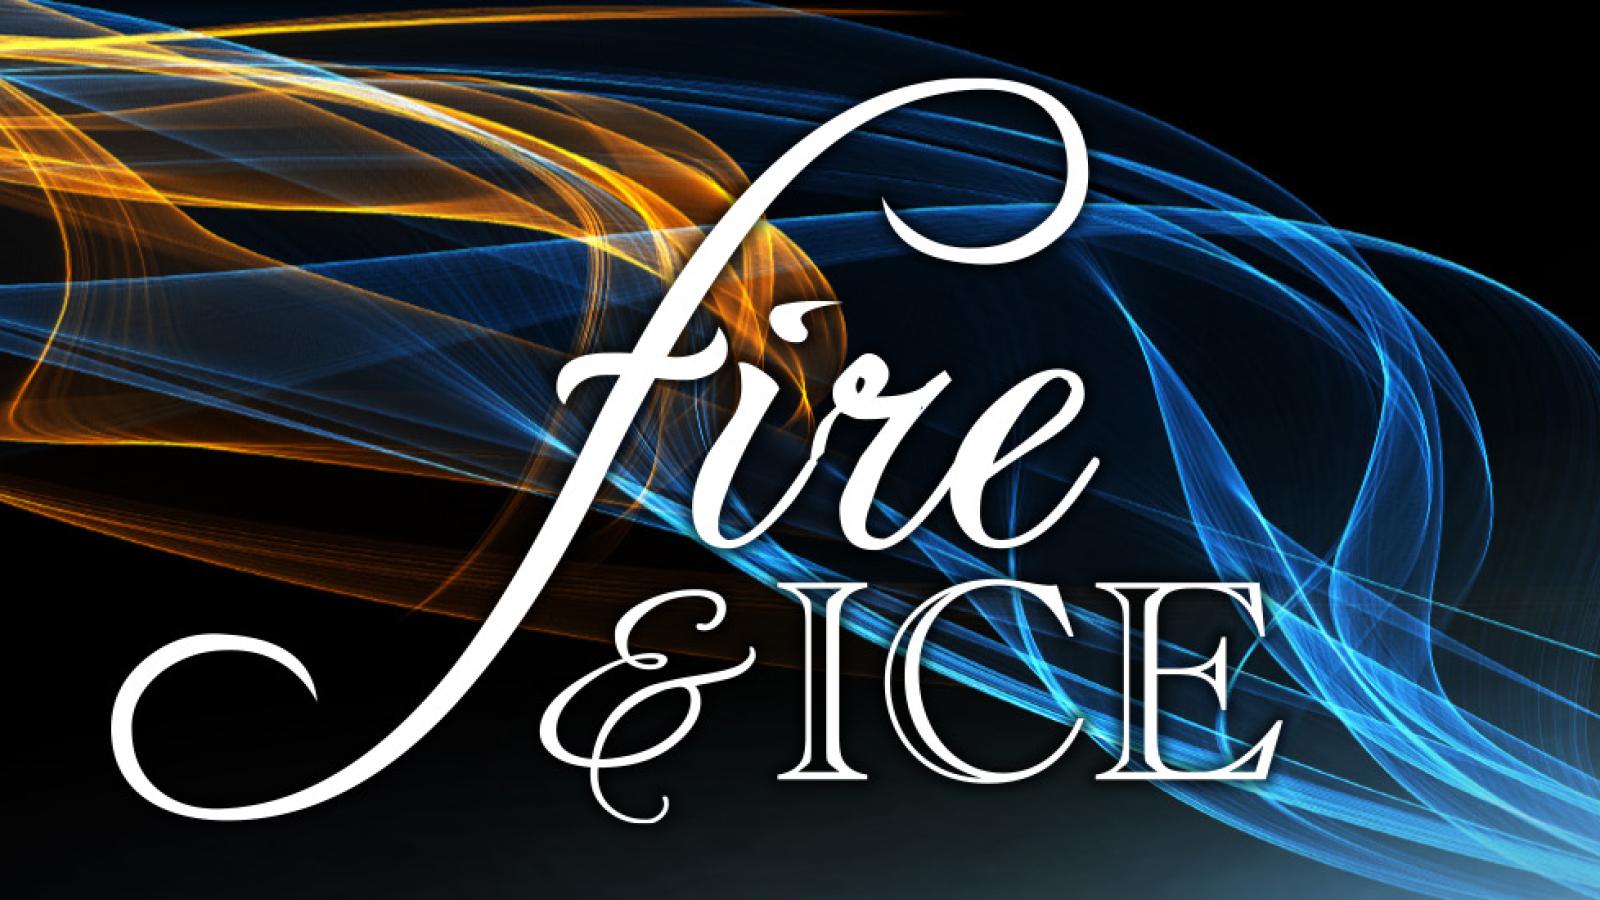 Fire and Ice - Guthrie Gala 2 